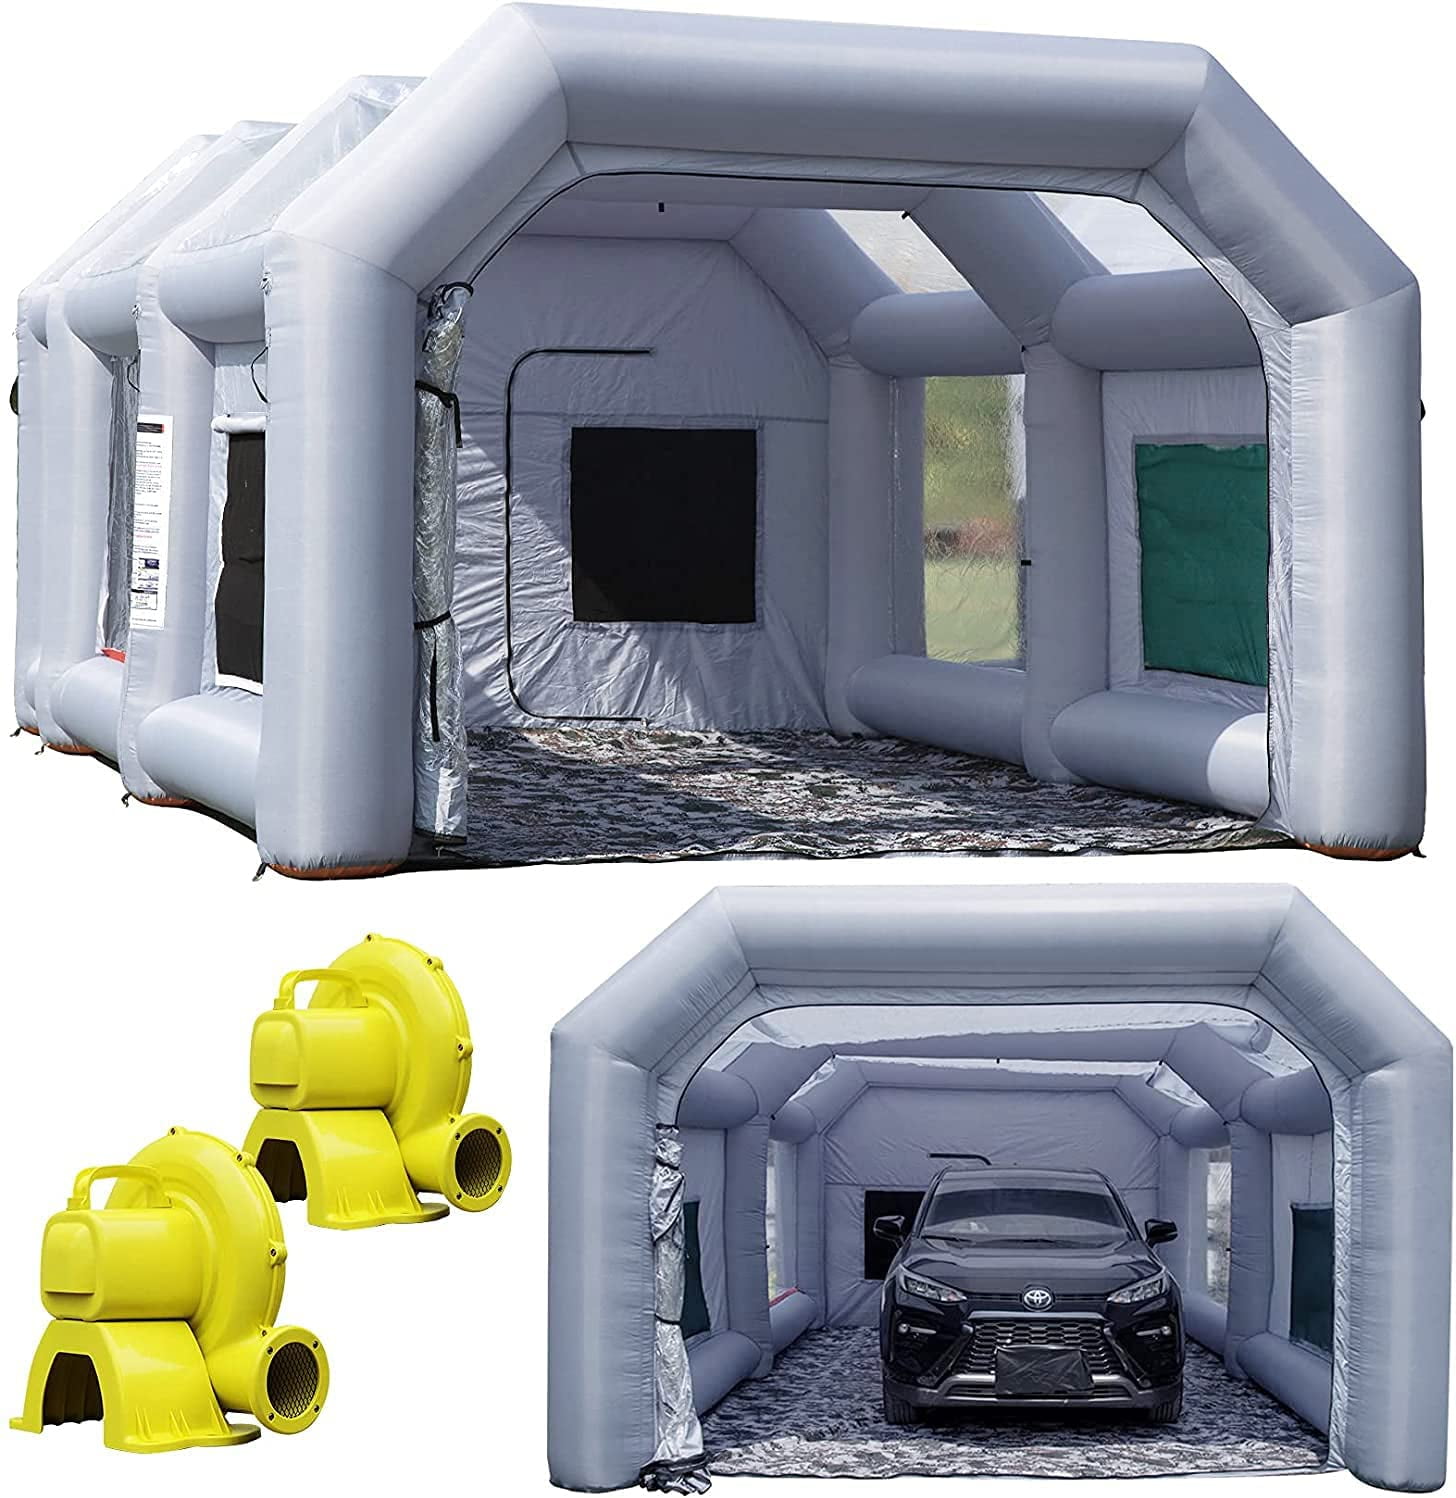 Inflatable Spray Booth Custom Tent Car Paint Automotive Tool & Supplies from CN 